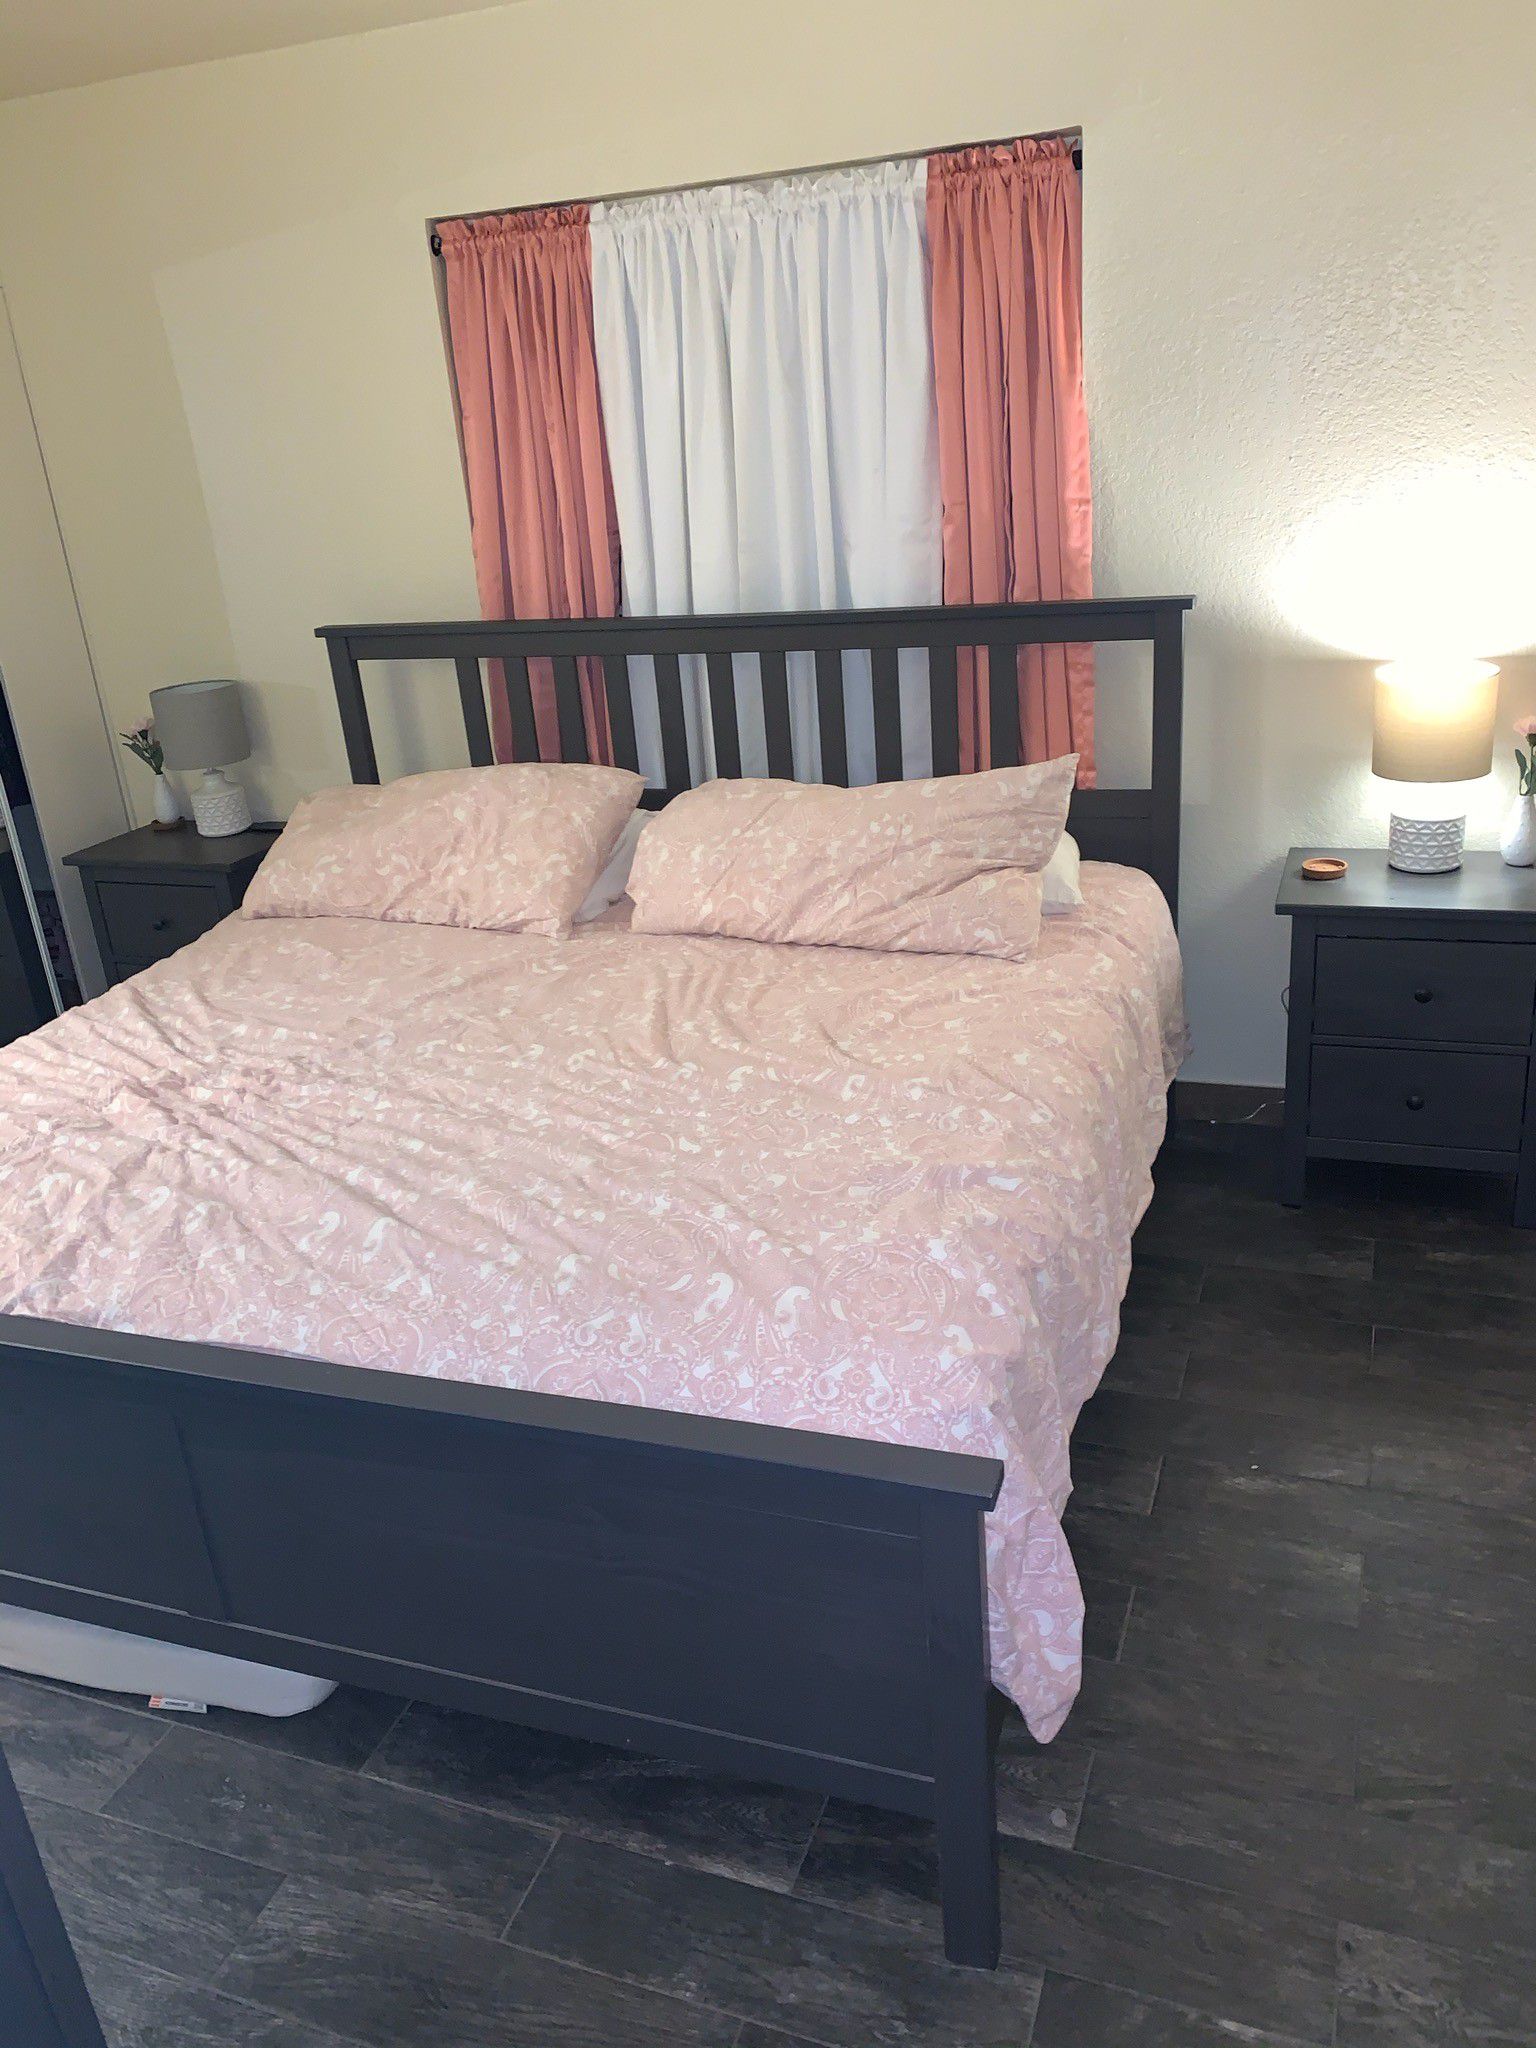 King bed frame and 2 night stands and dresser